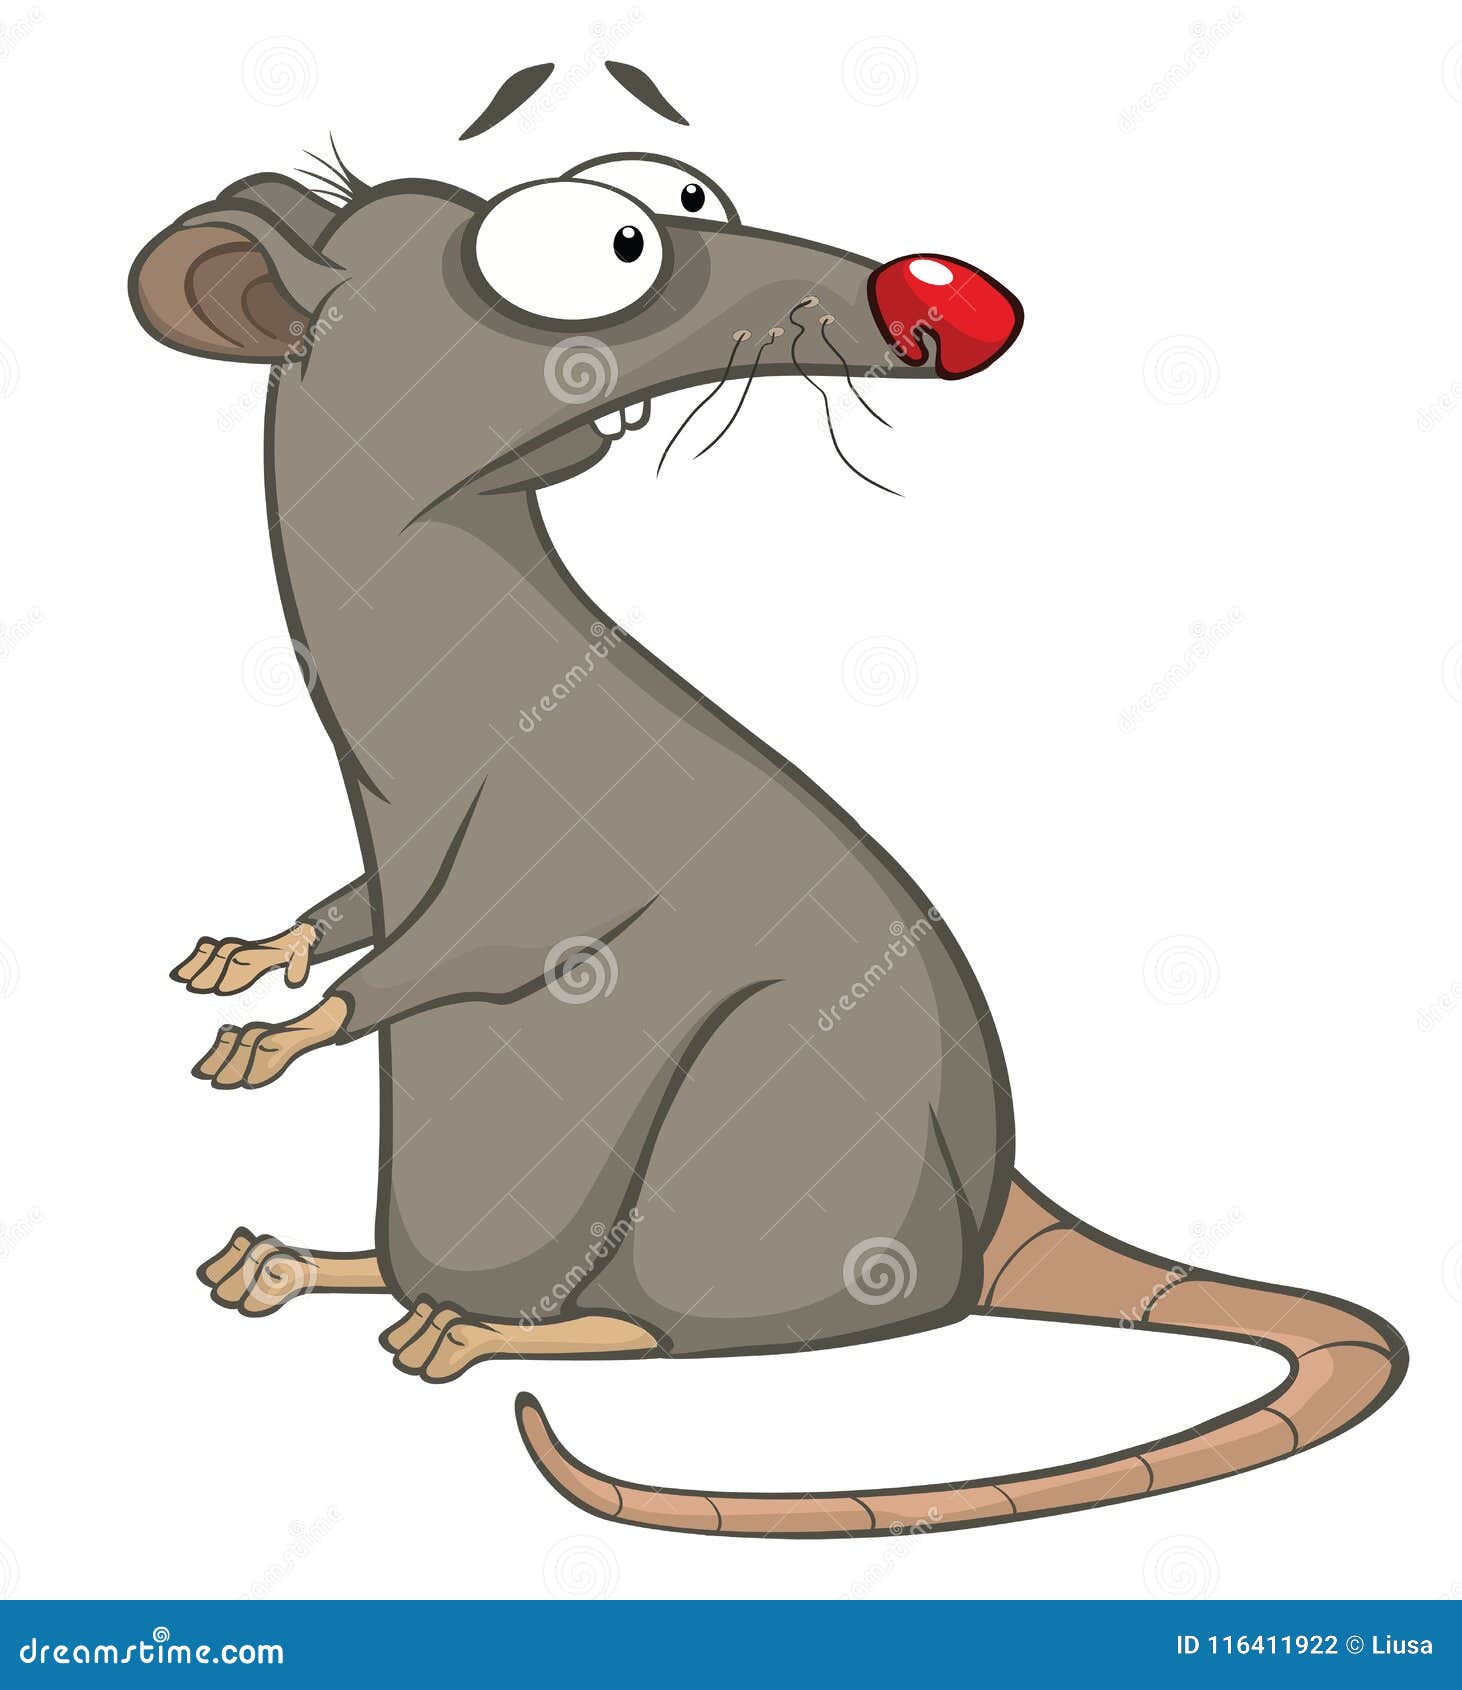 List 94+ Images white cartoon mouse with a red nose Superb